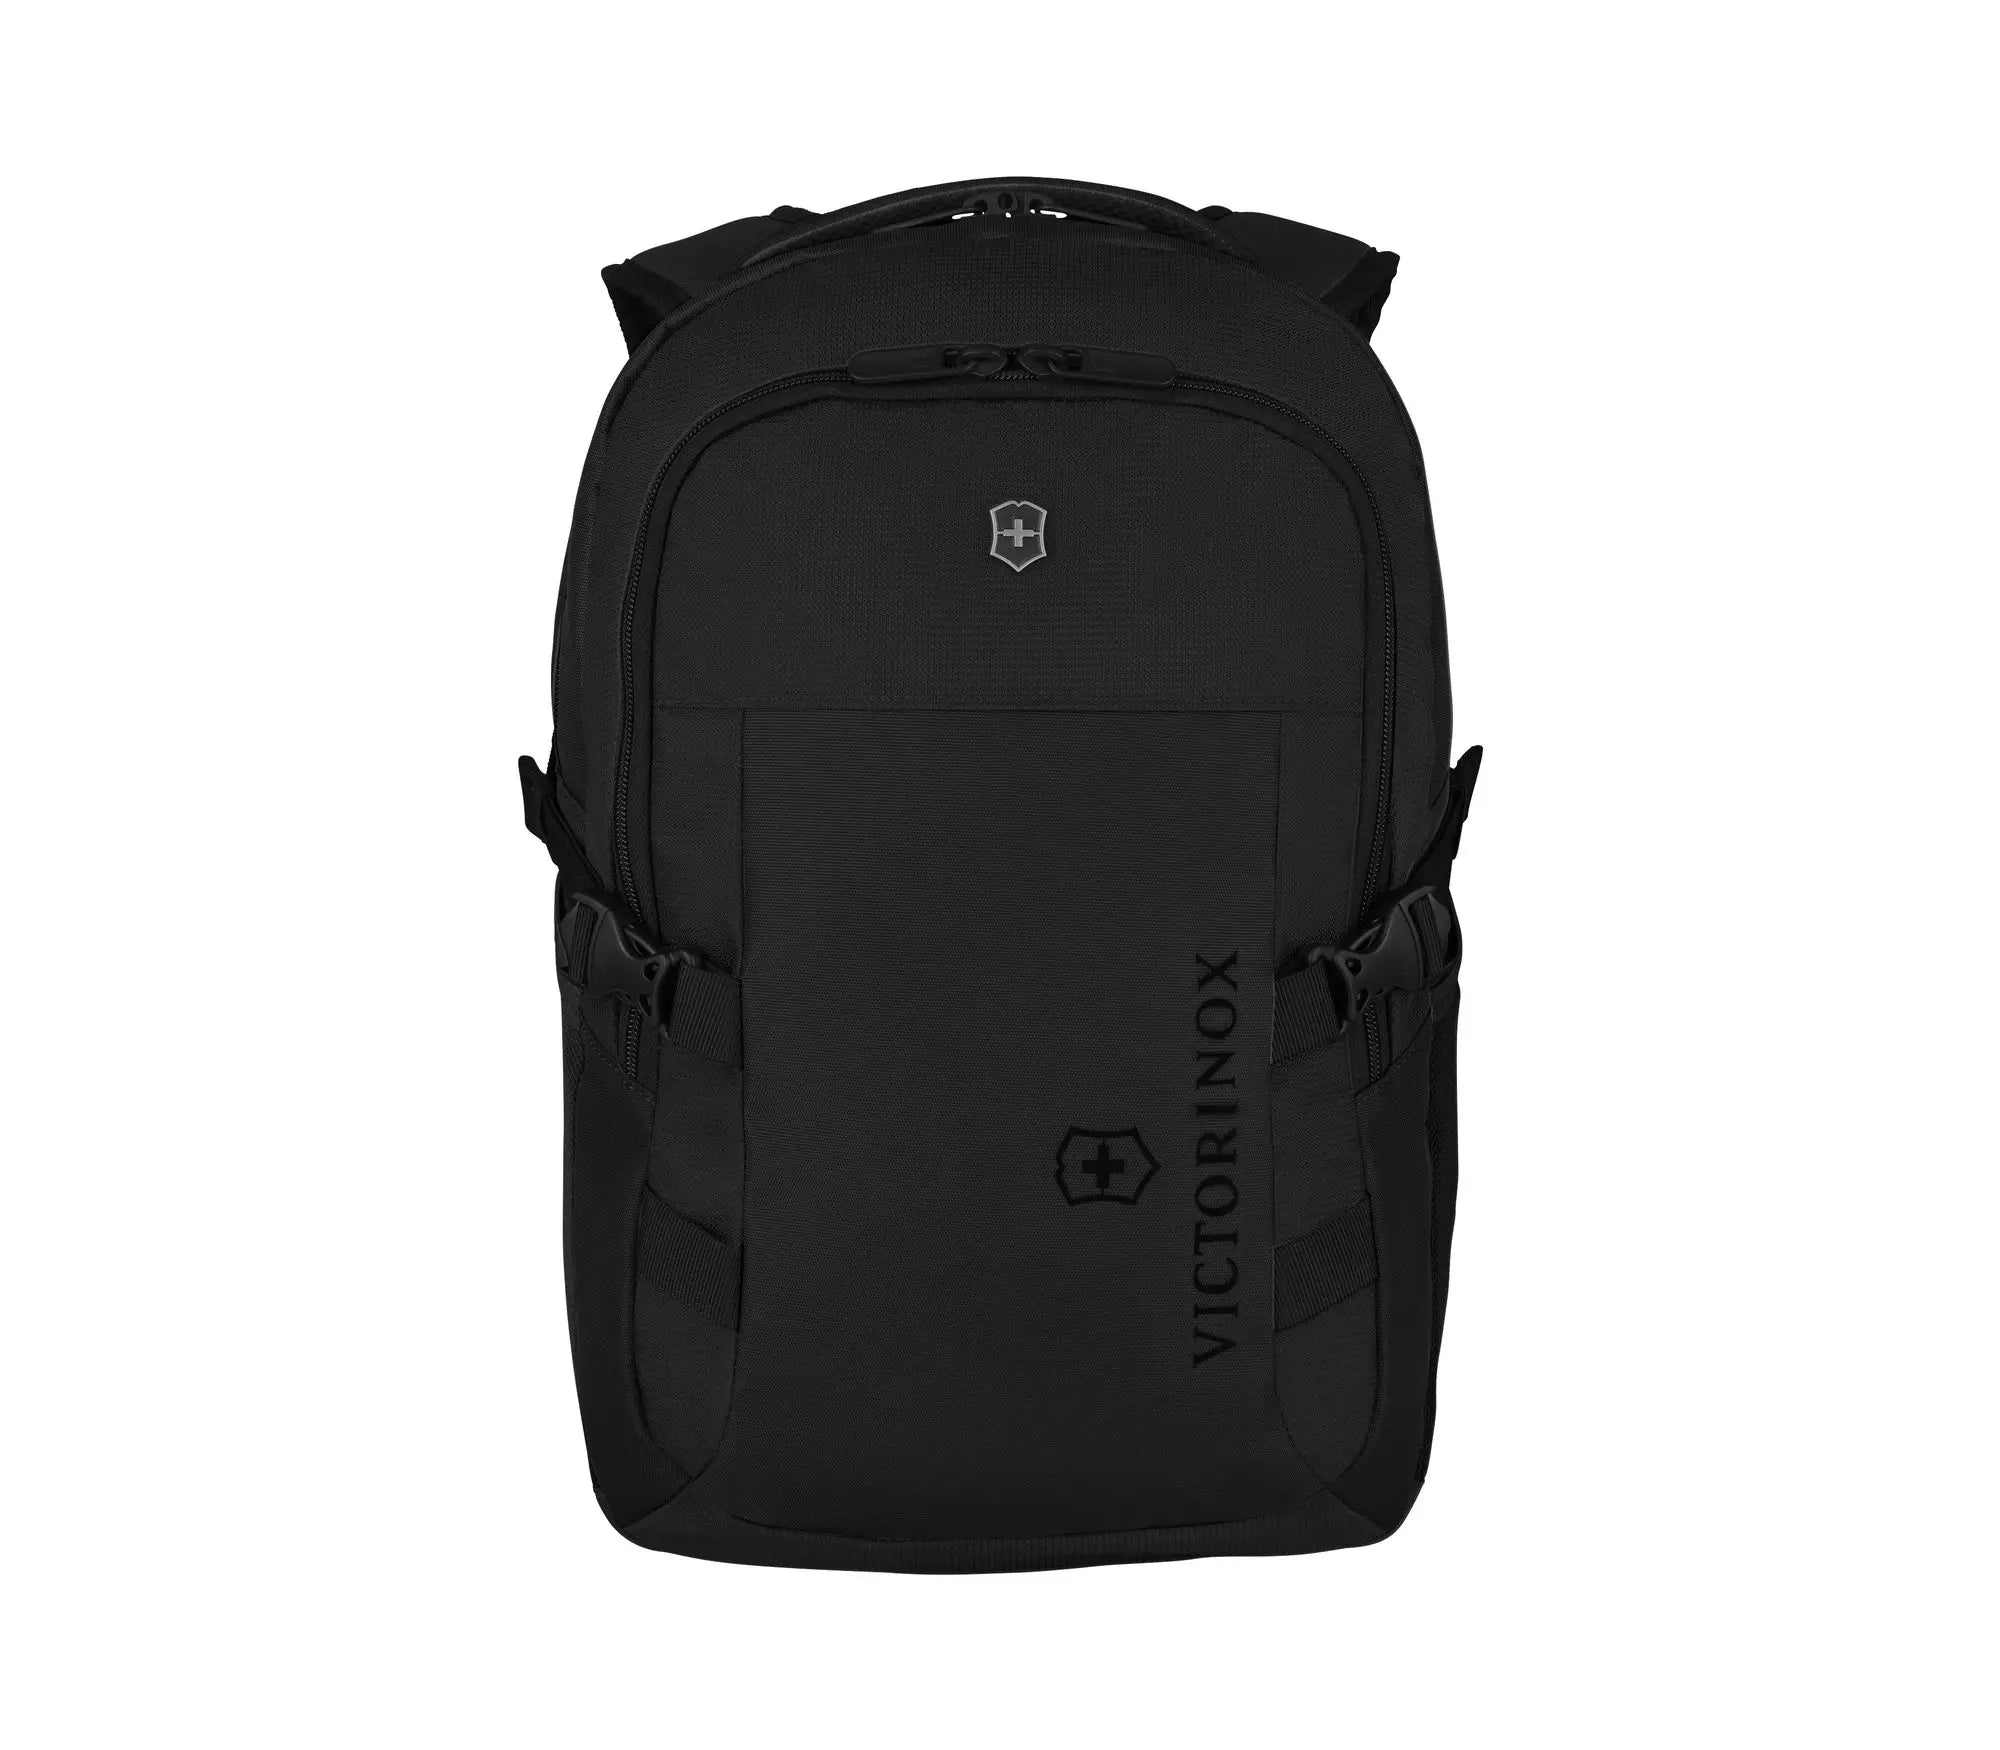 VX Sport Evo Compact Backpack - Voyage Luggage